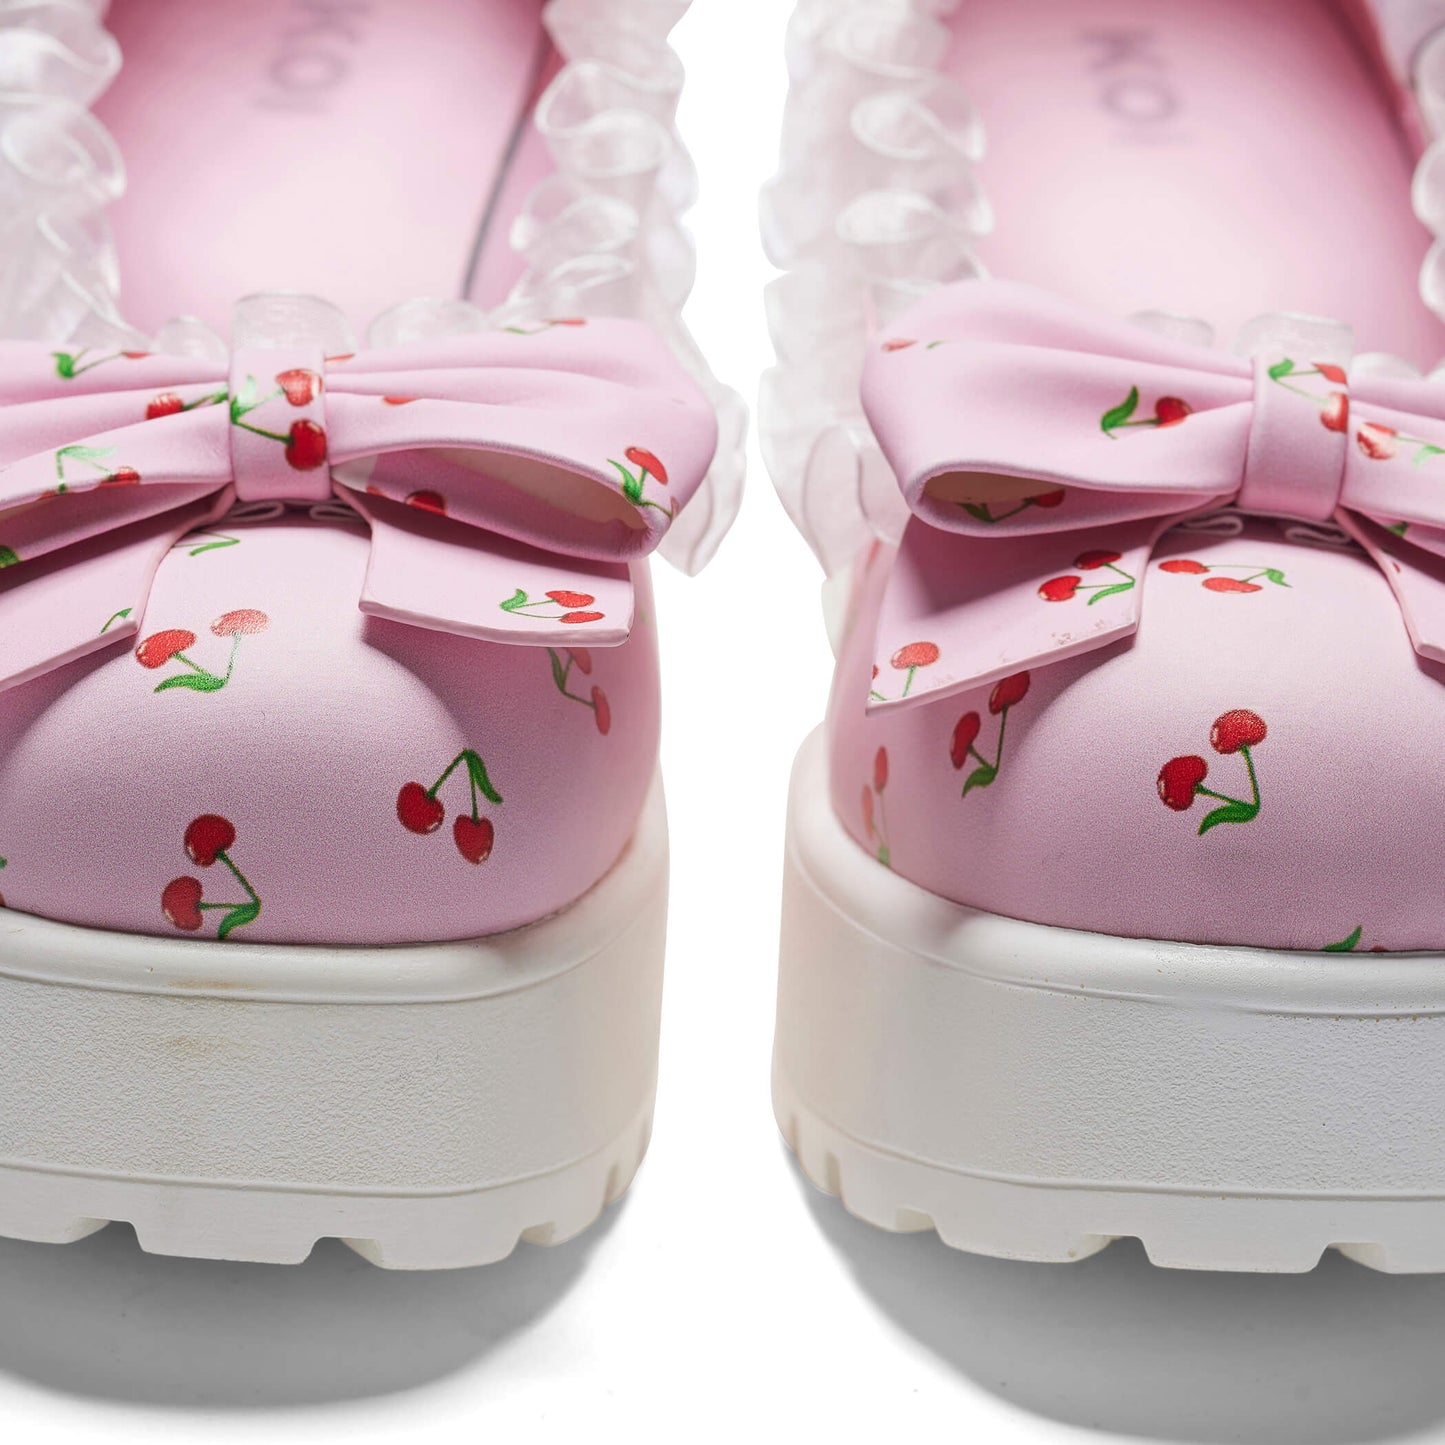 Tira Mary Janes Shoes 'Pink Cherry Bakewell Edition' - Mary Janes - KOI Footwear - Pink - Front Detail